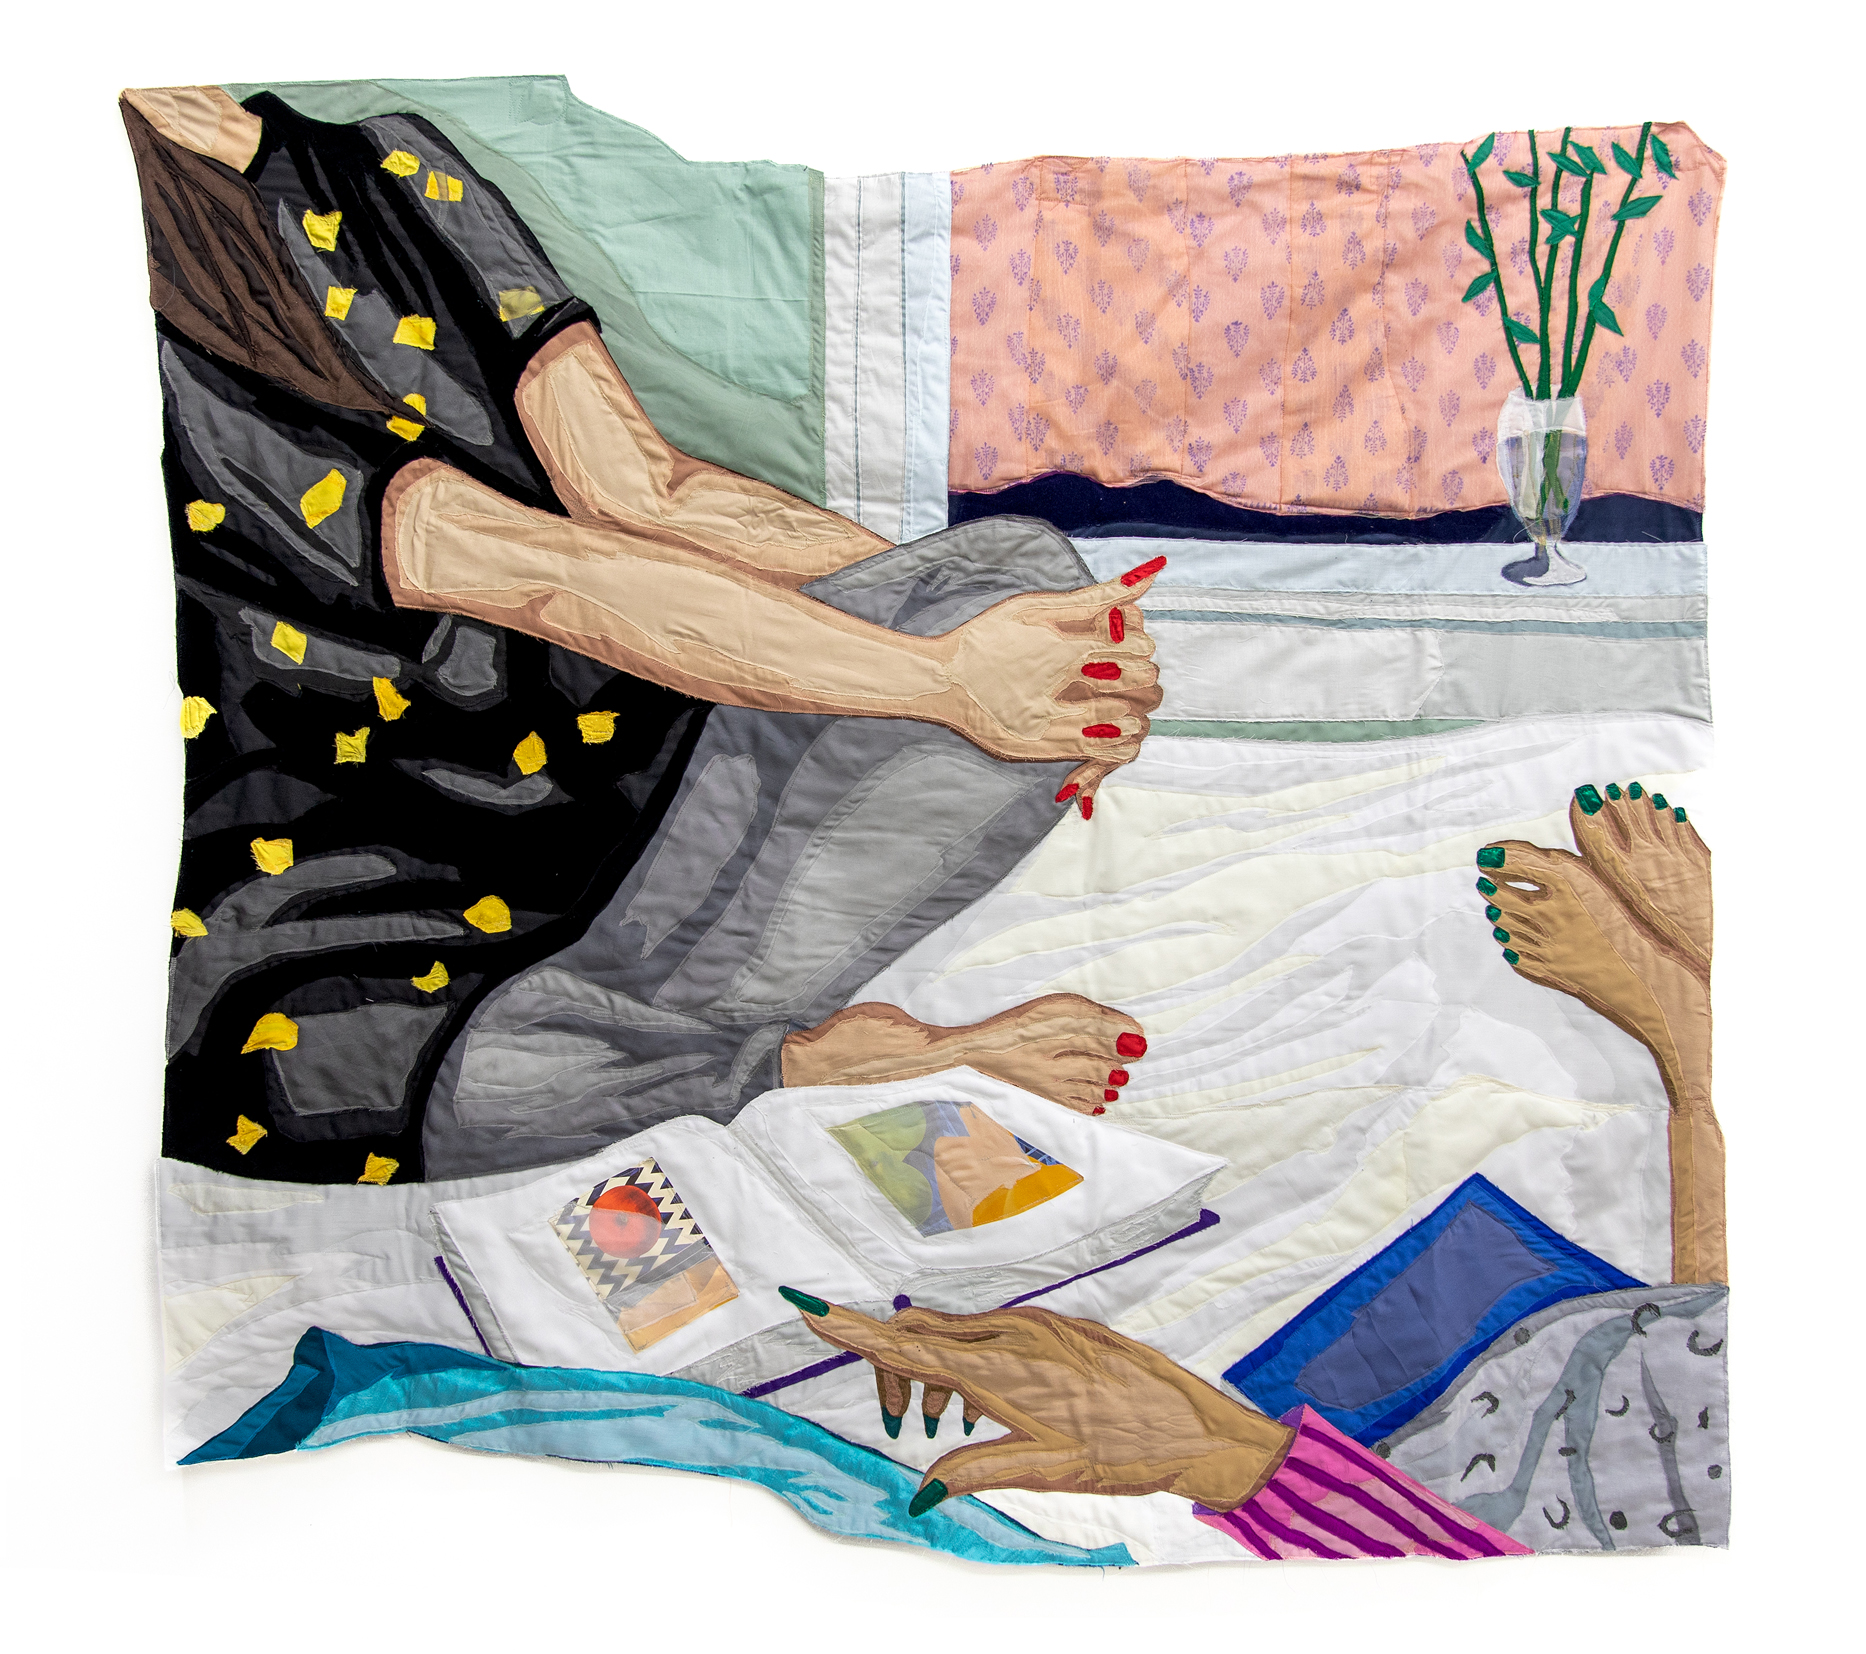 A textile work by Hangama Amiri showing two artists sitting on the floor in front of an open book